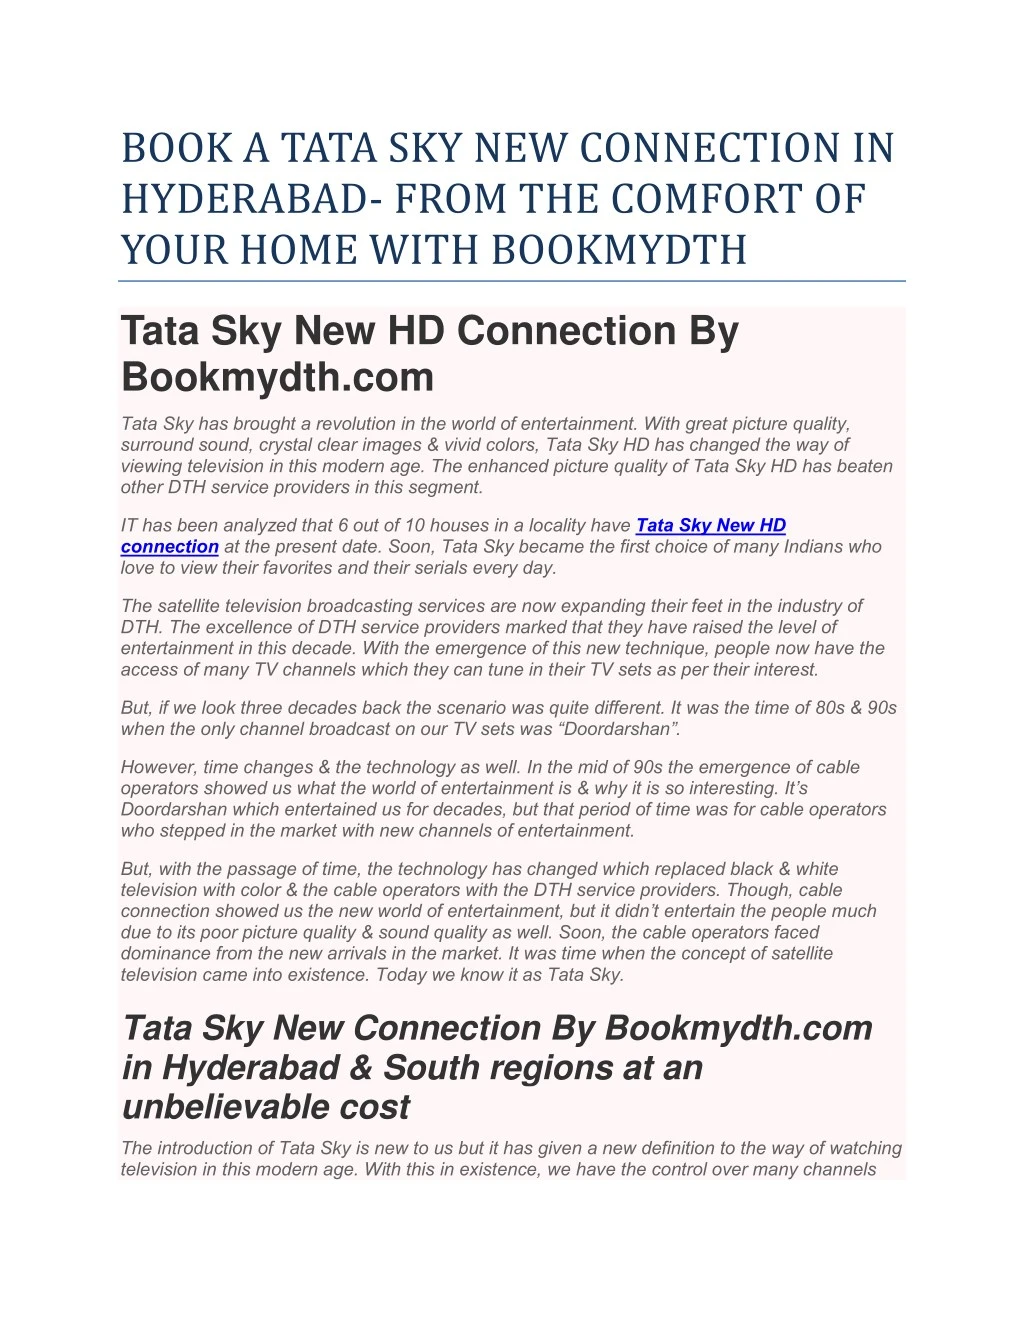 book a tata sky new connection in hyderabad from